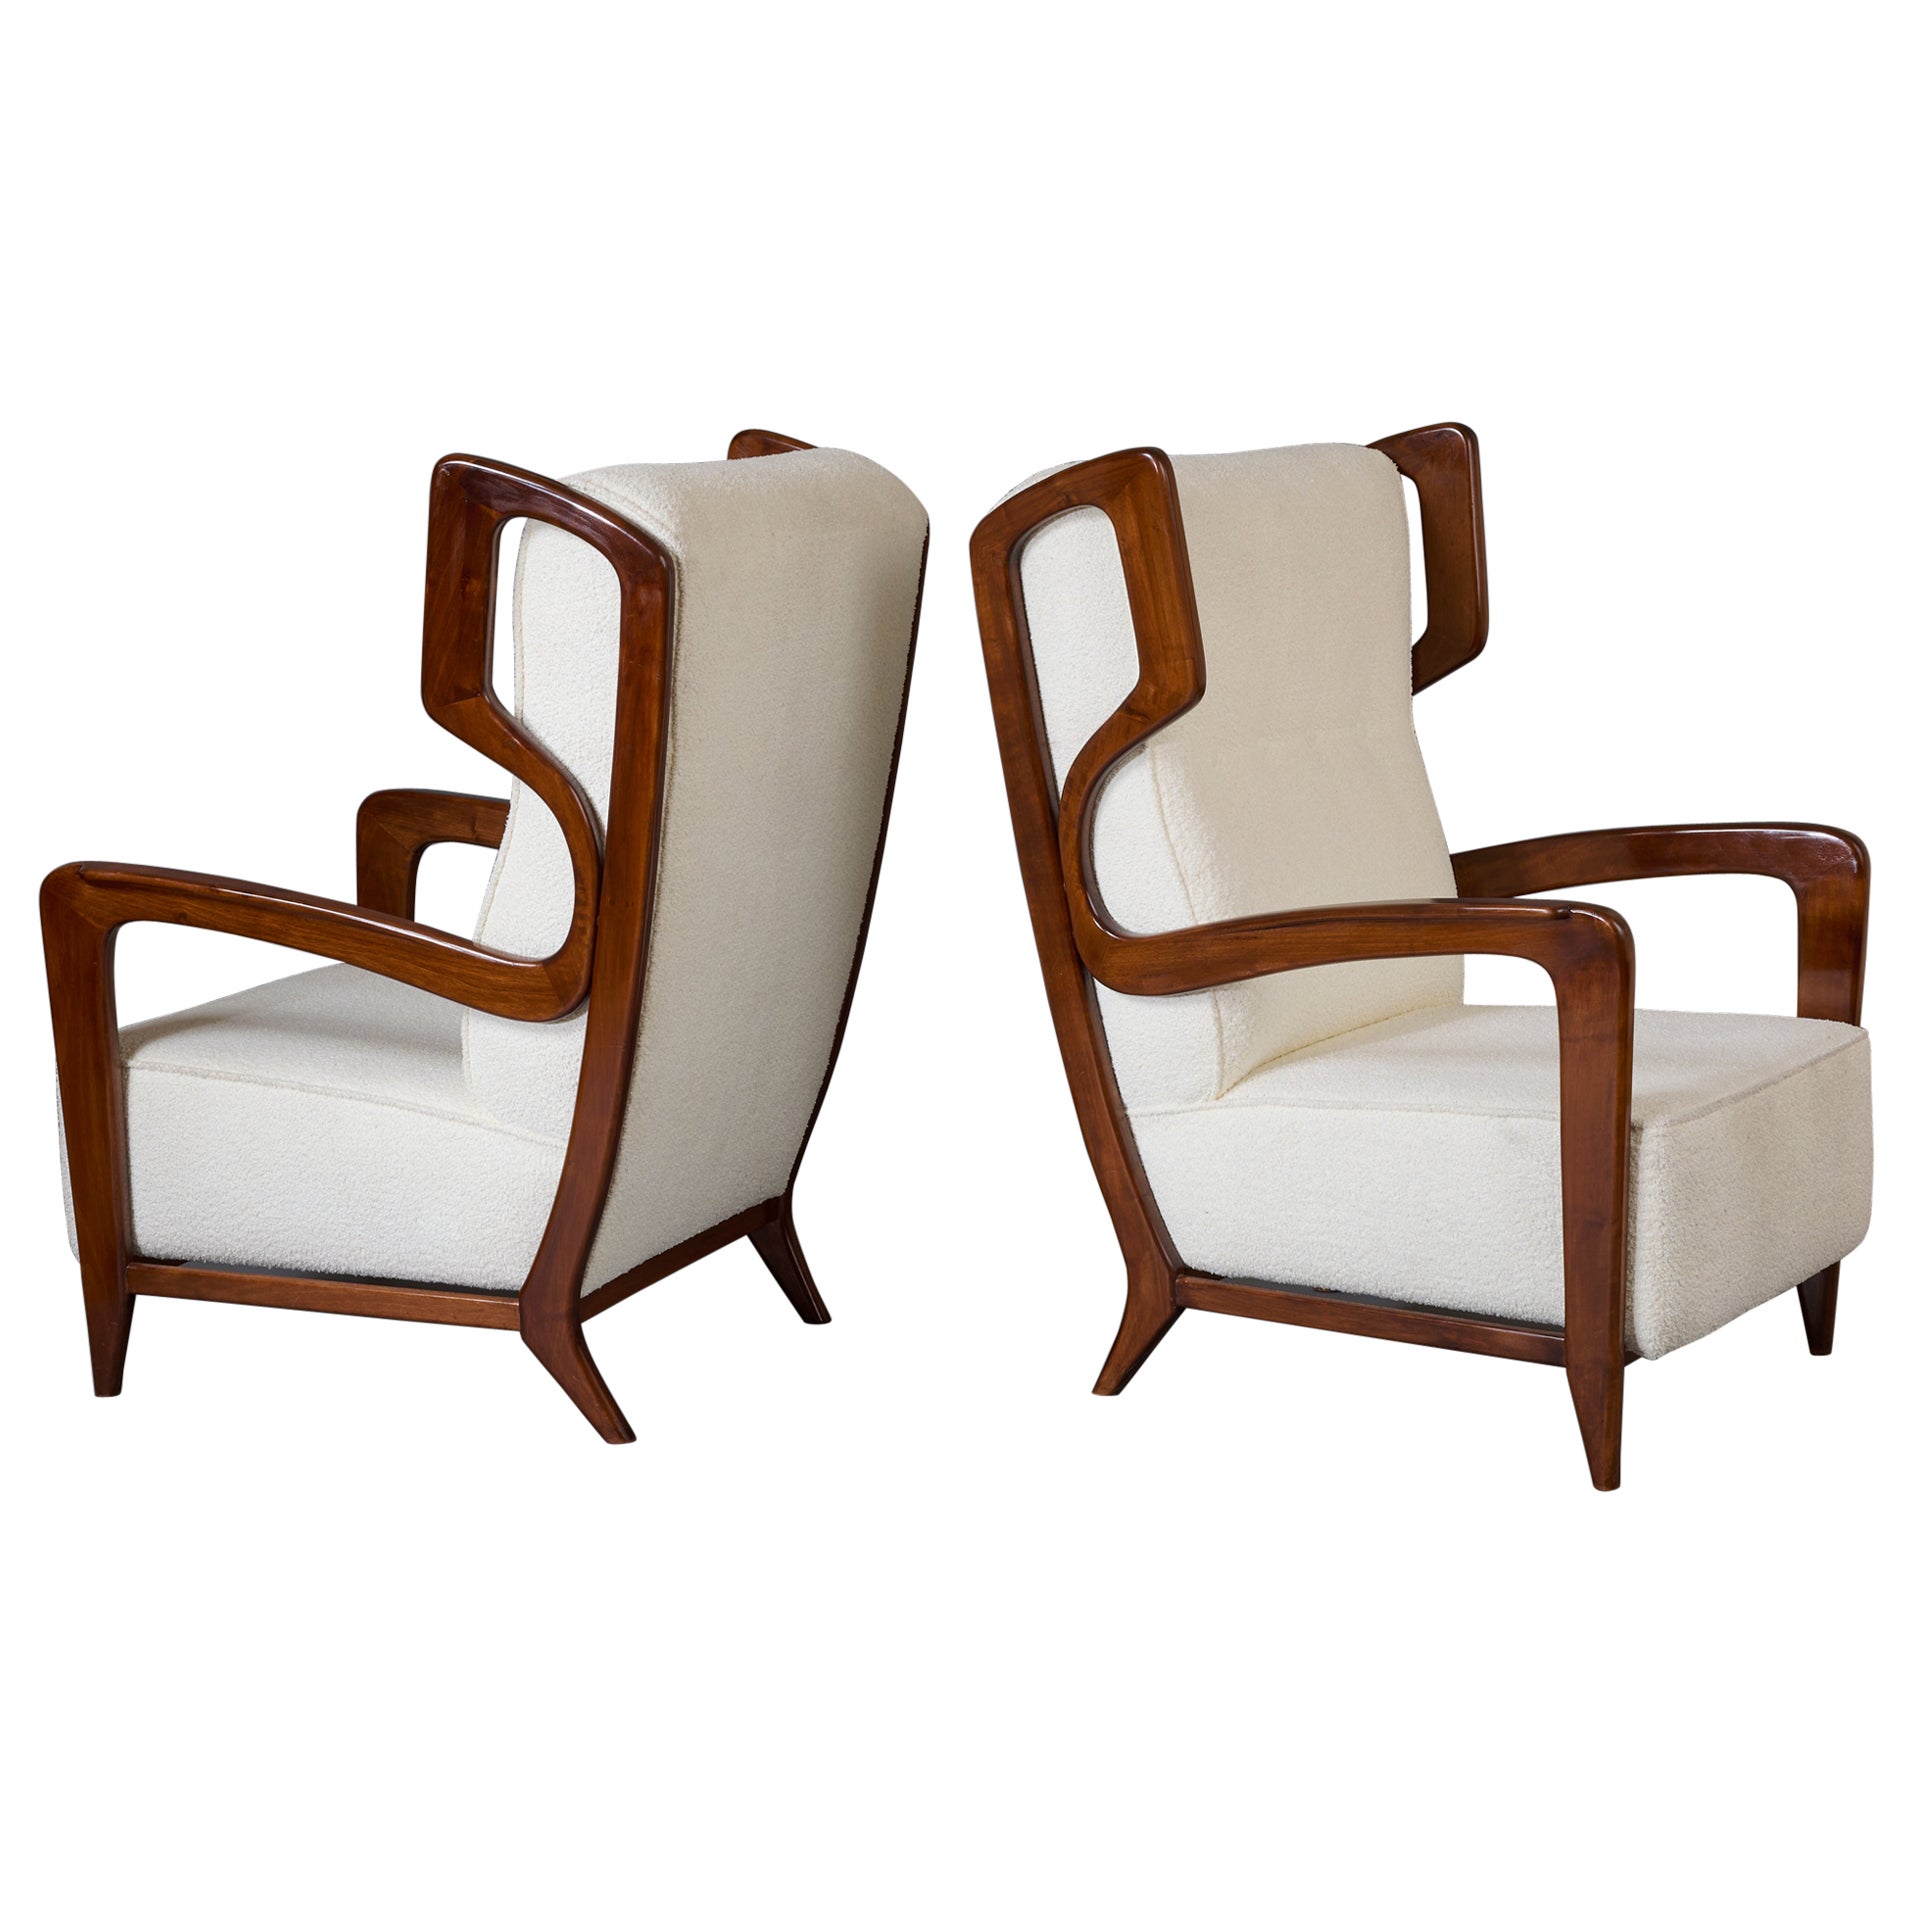 Gio Ponti, Exceptional Pair of Rare Wingback Armchairs in Walnut, Italy, 1940s